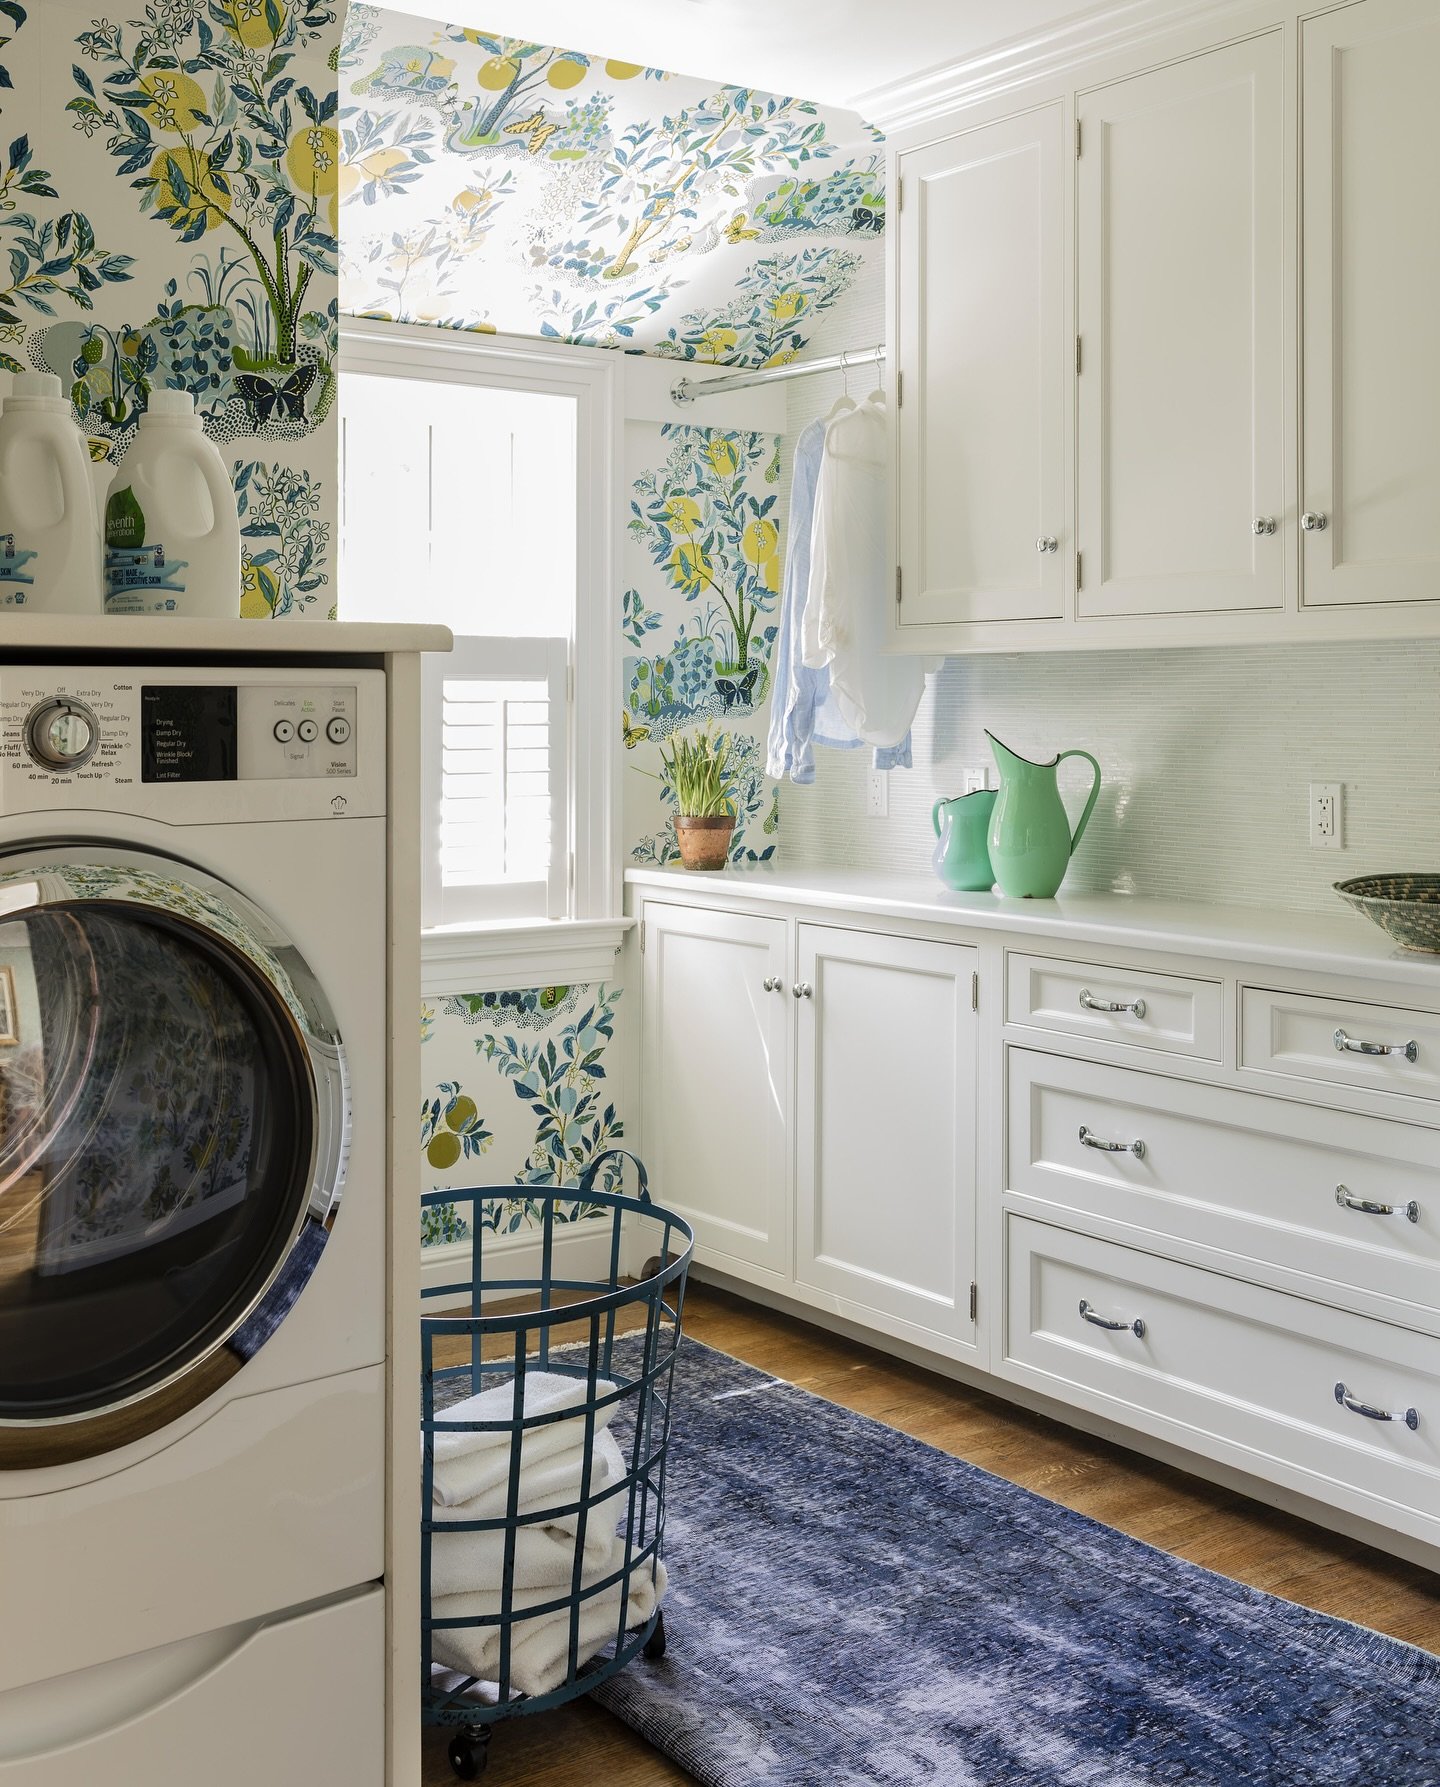 From mundane to marvelous: Revamp your laundry routine with a room that blooms with charm. 🍋⁣
⁣
⁣
Interior design: @robingannoninteriors⁣
Photography: @michaeljleephotography